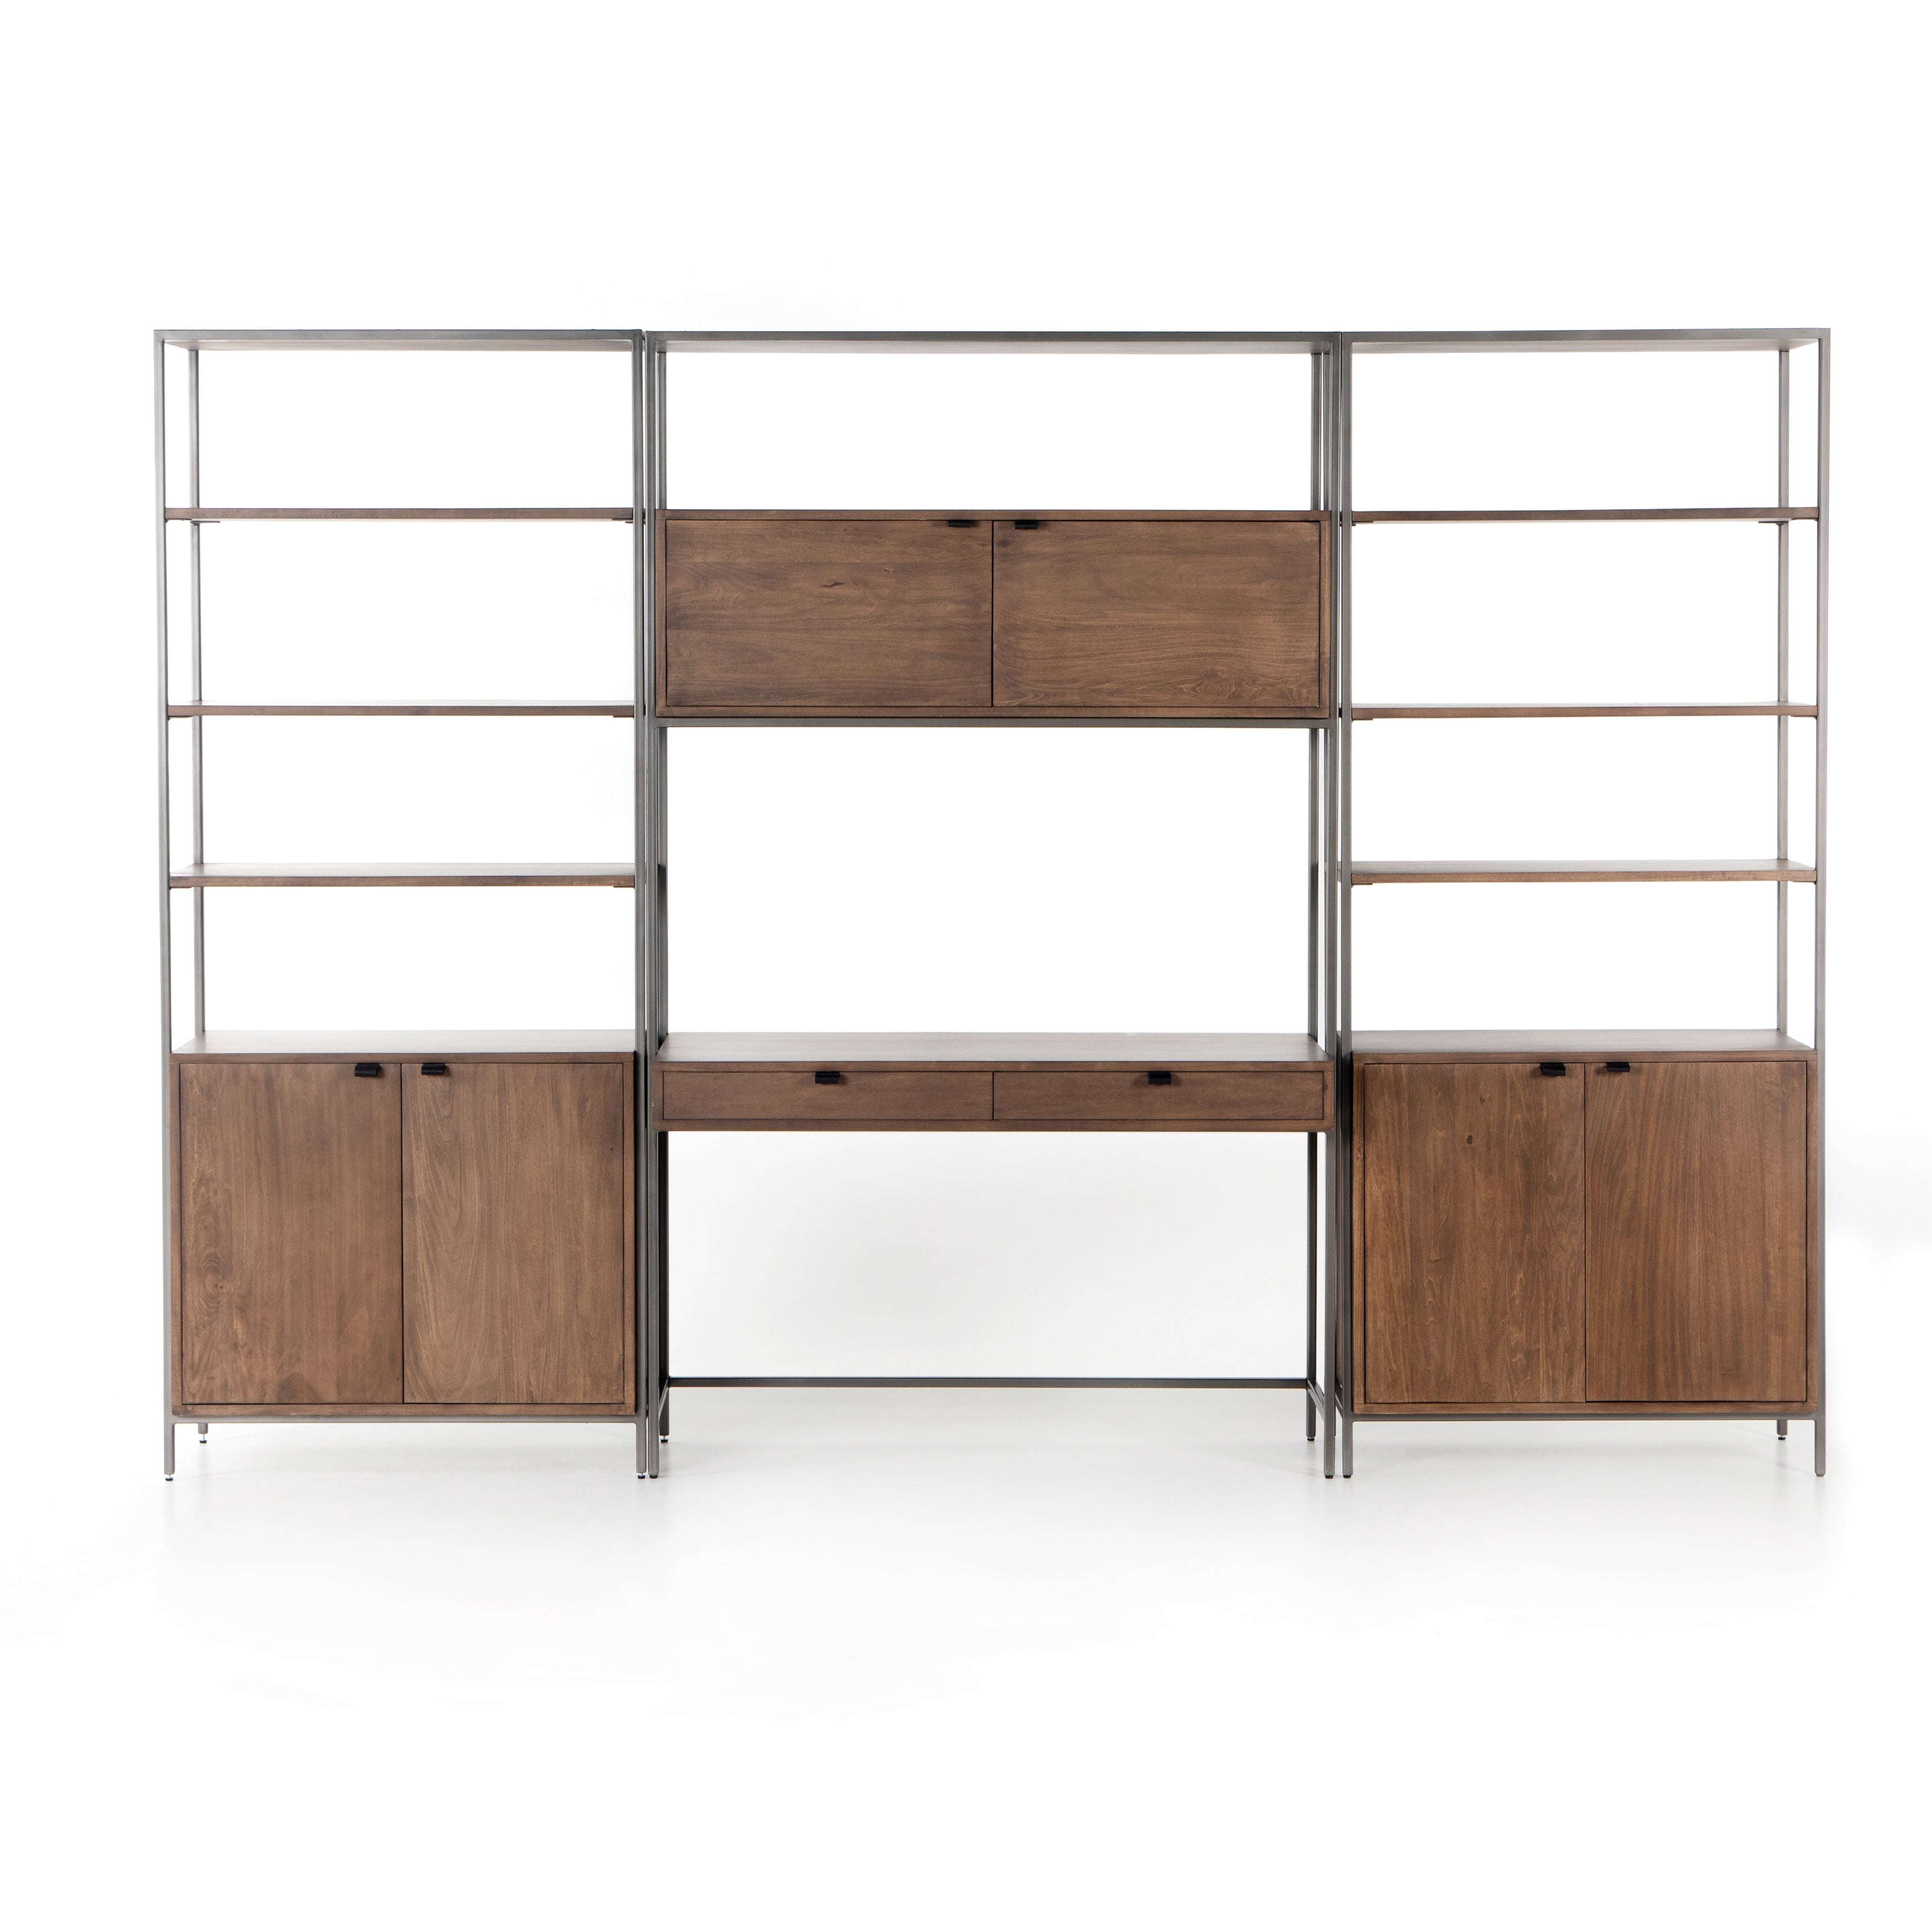 Thomas Modular Wall Desk with 2 Bookcases